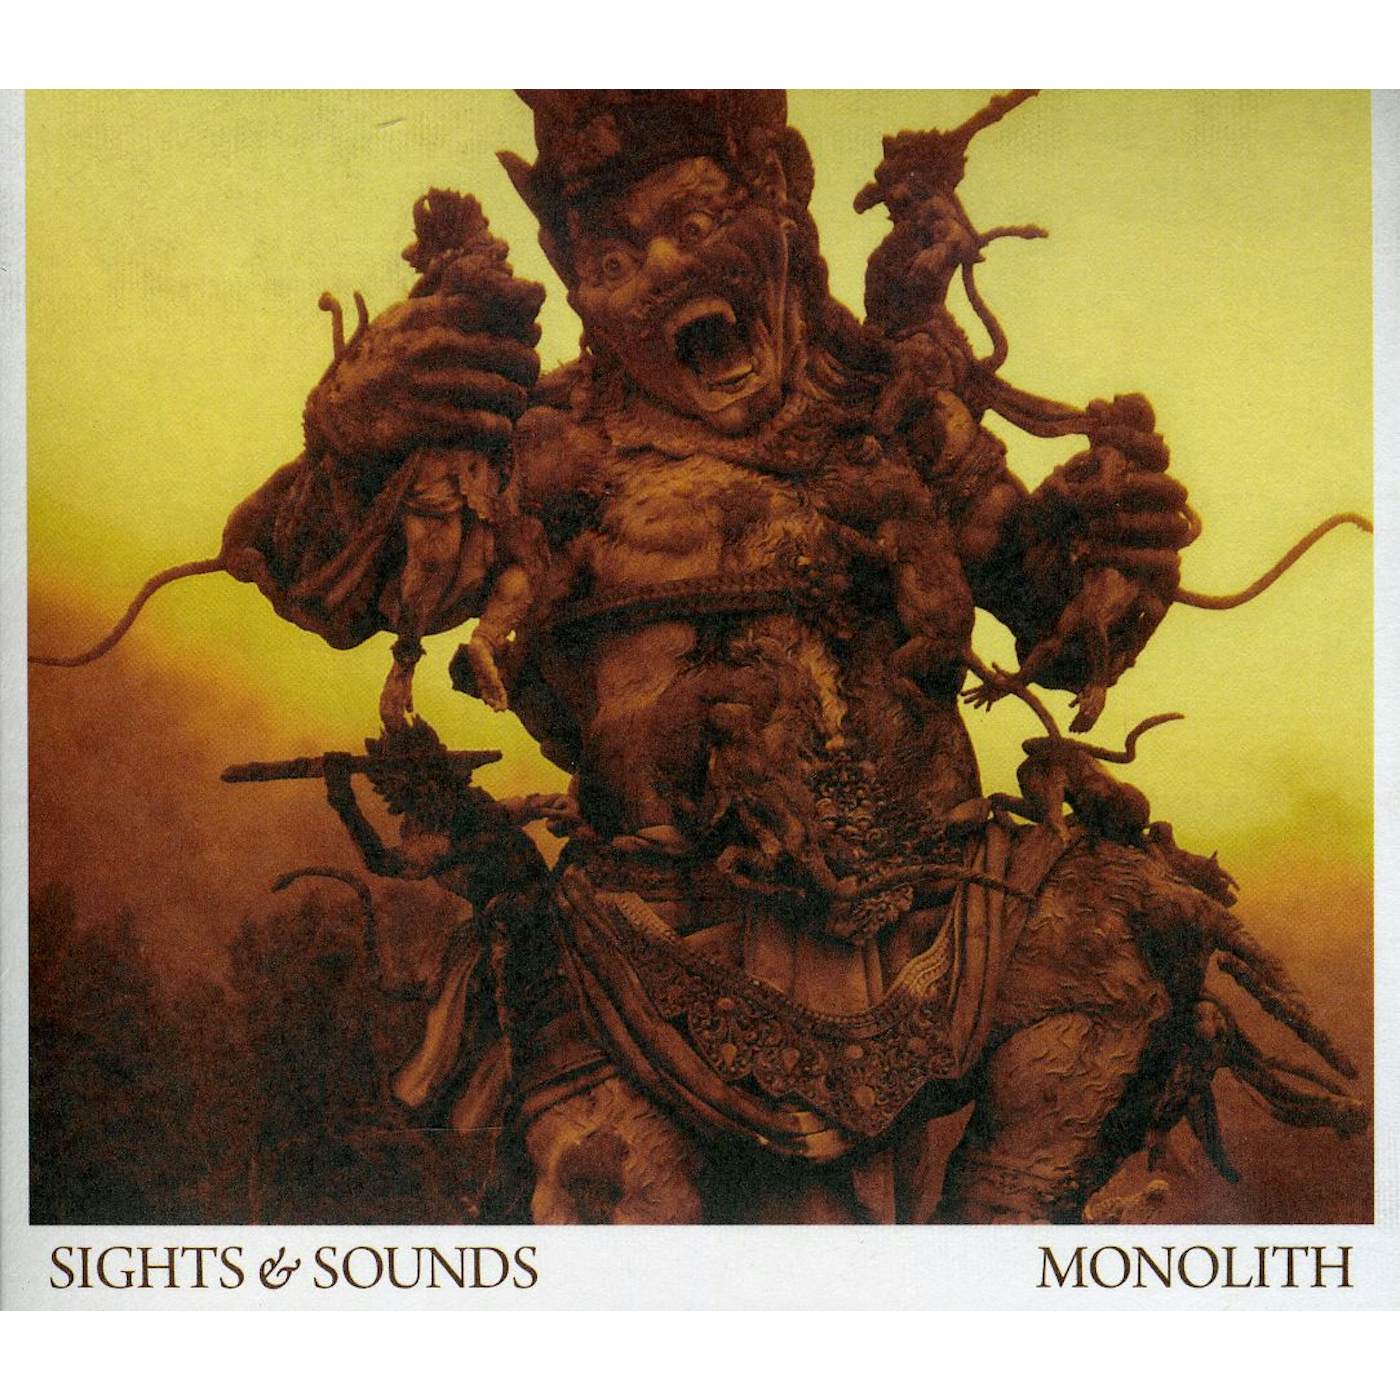 Sights & Sounds MONOLITH CD